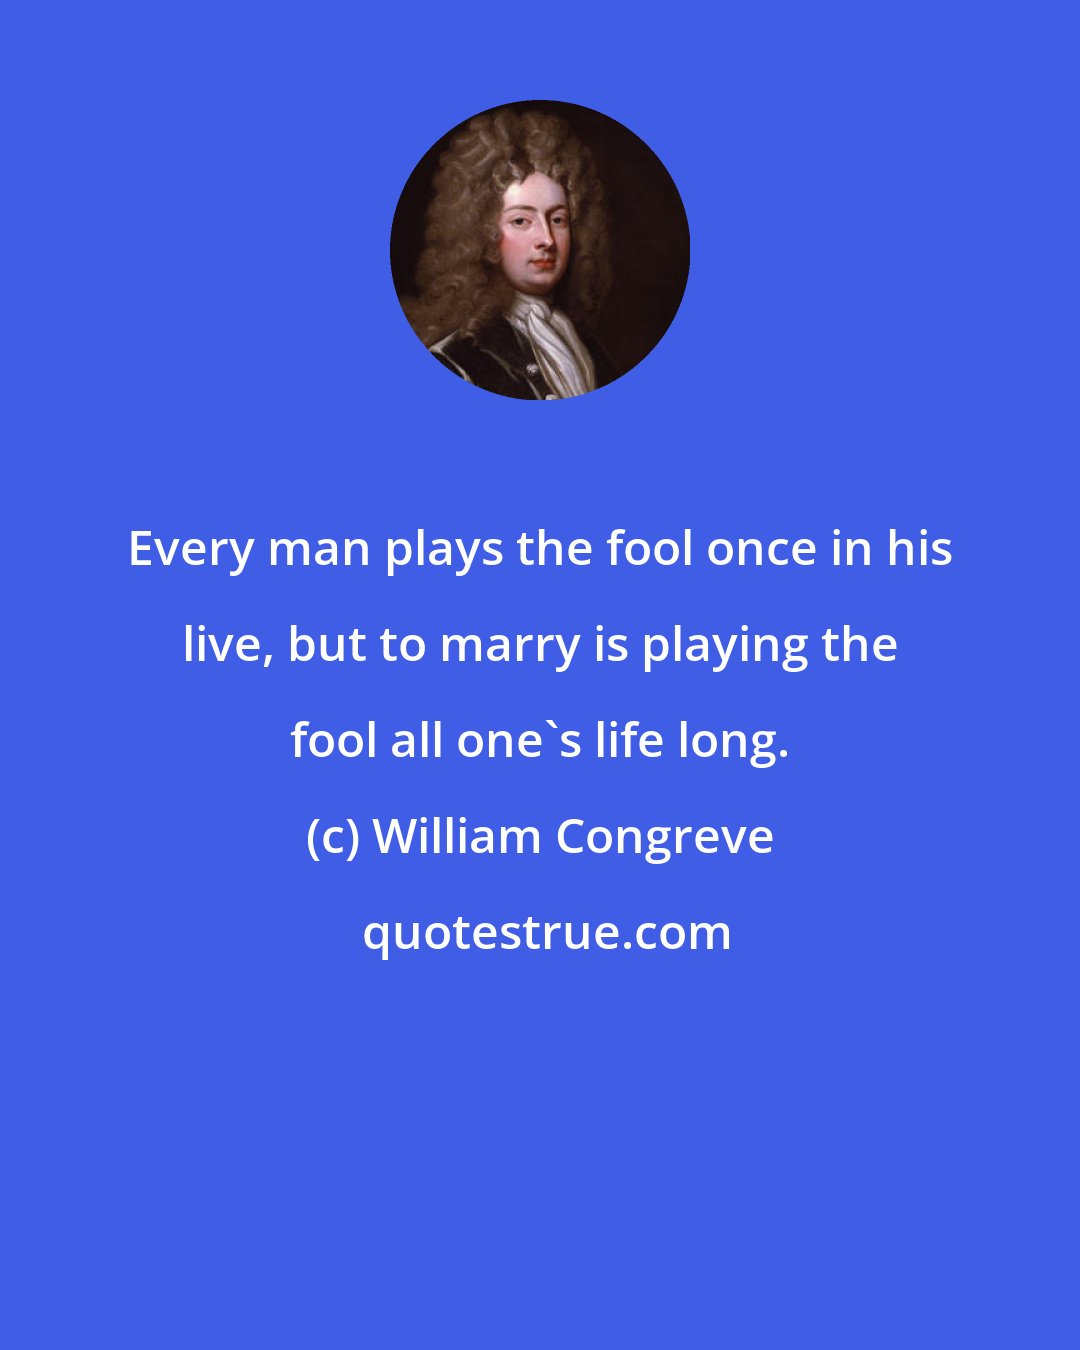 William Congreve: Every man plays the fool once in his live, but to marry is playing the fool all one's life long.